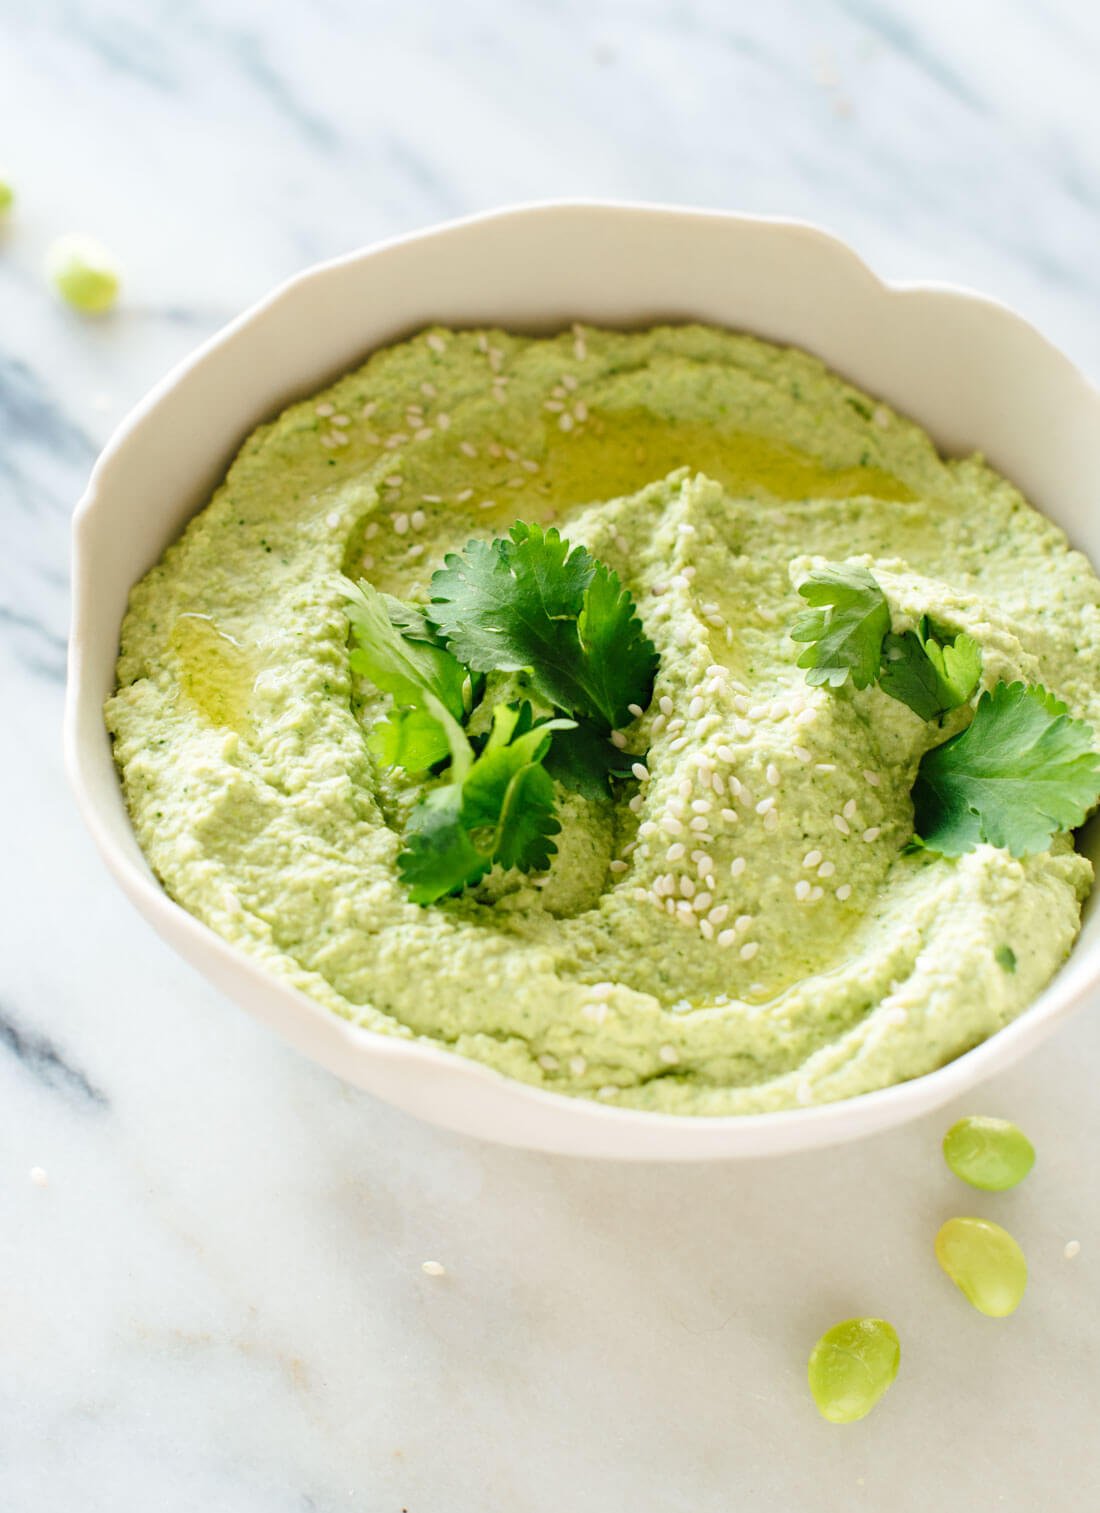 This edamame hummus recipe is fresh, healthy and delicious! It's a fun alternative to regular hummus and pairs well with traditional Mediterranean or Asian flavors. cookieandkate.com